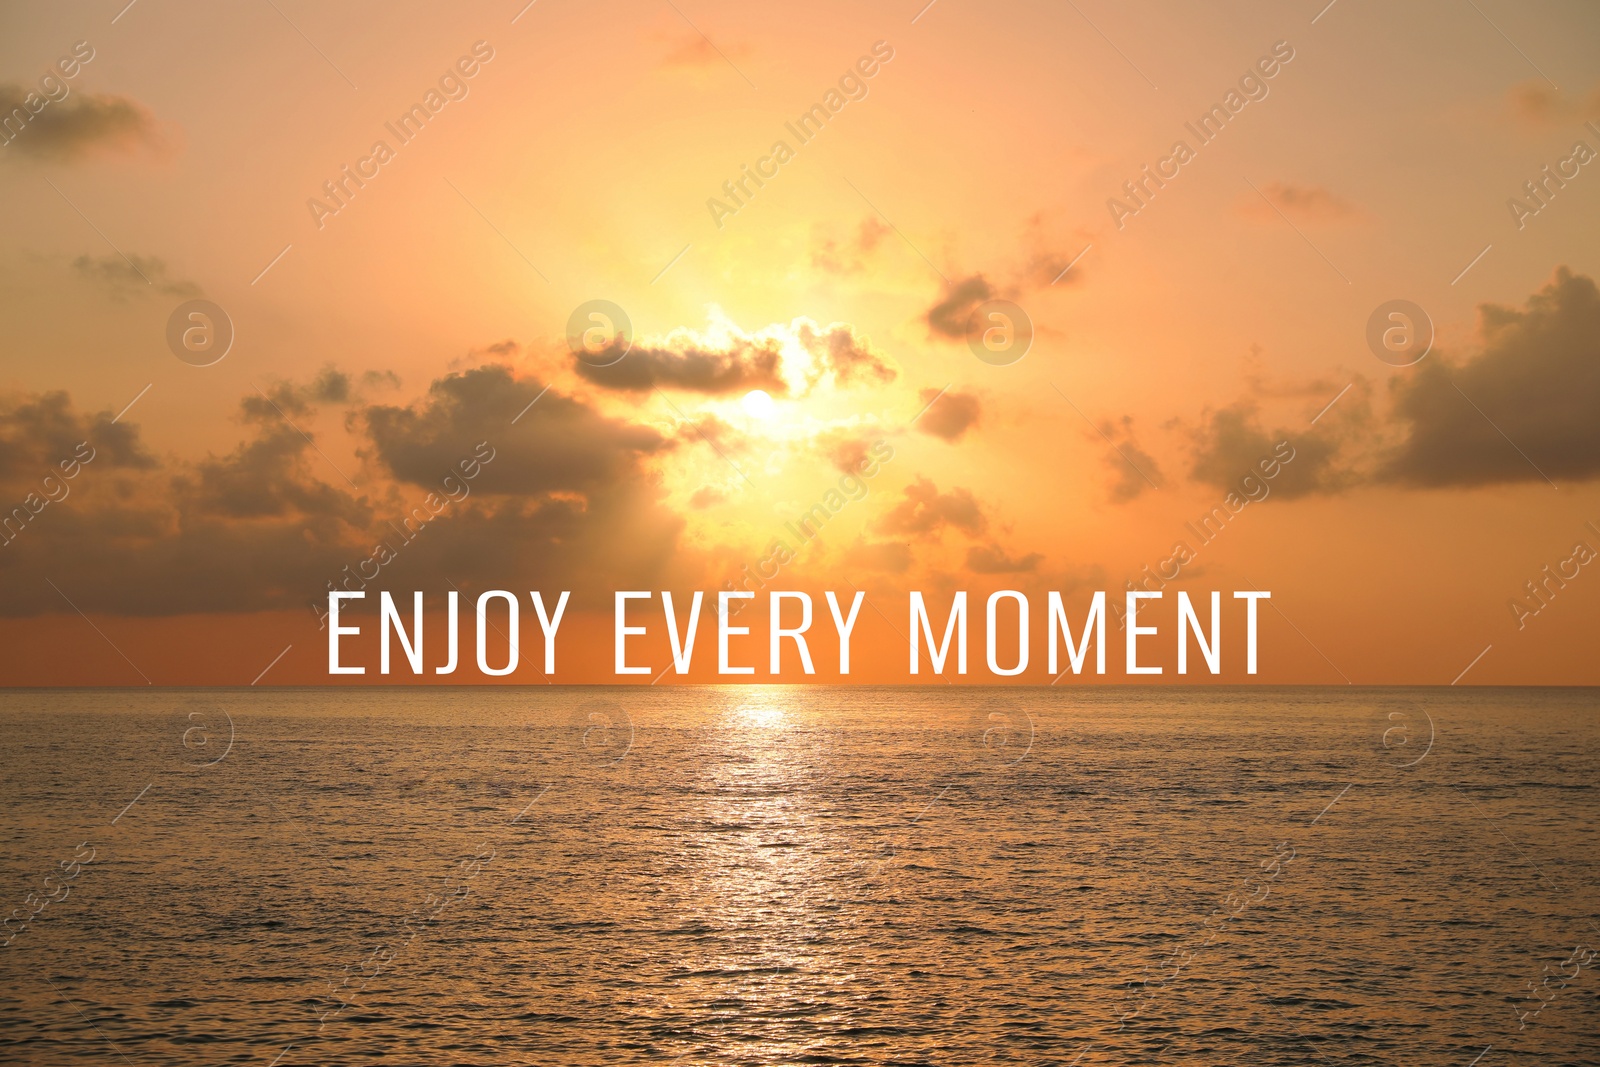 Image of Enjoy every moment, affirmation. Beautiful sky over sea at sunset